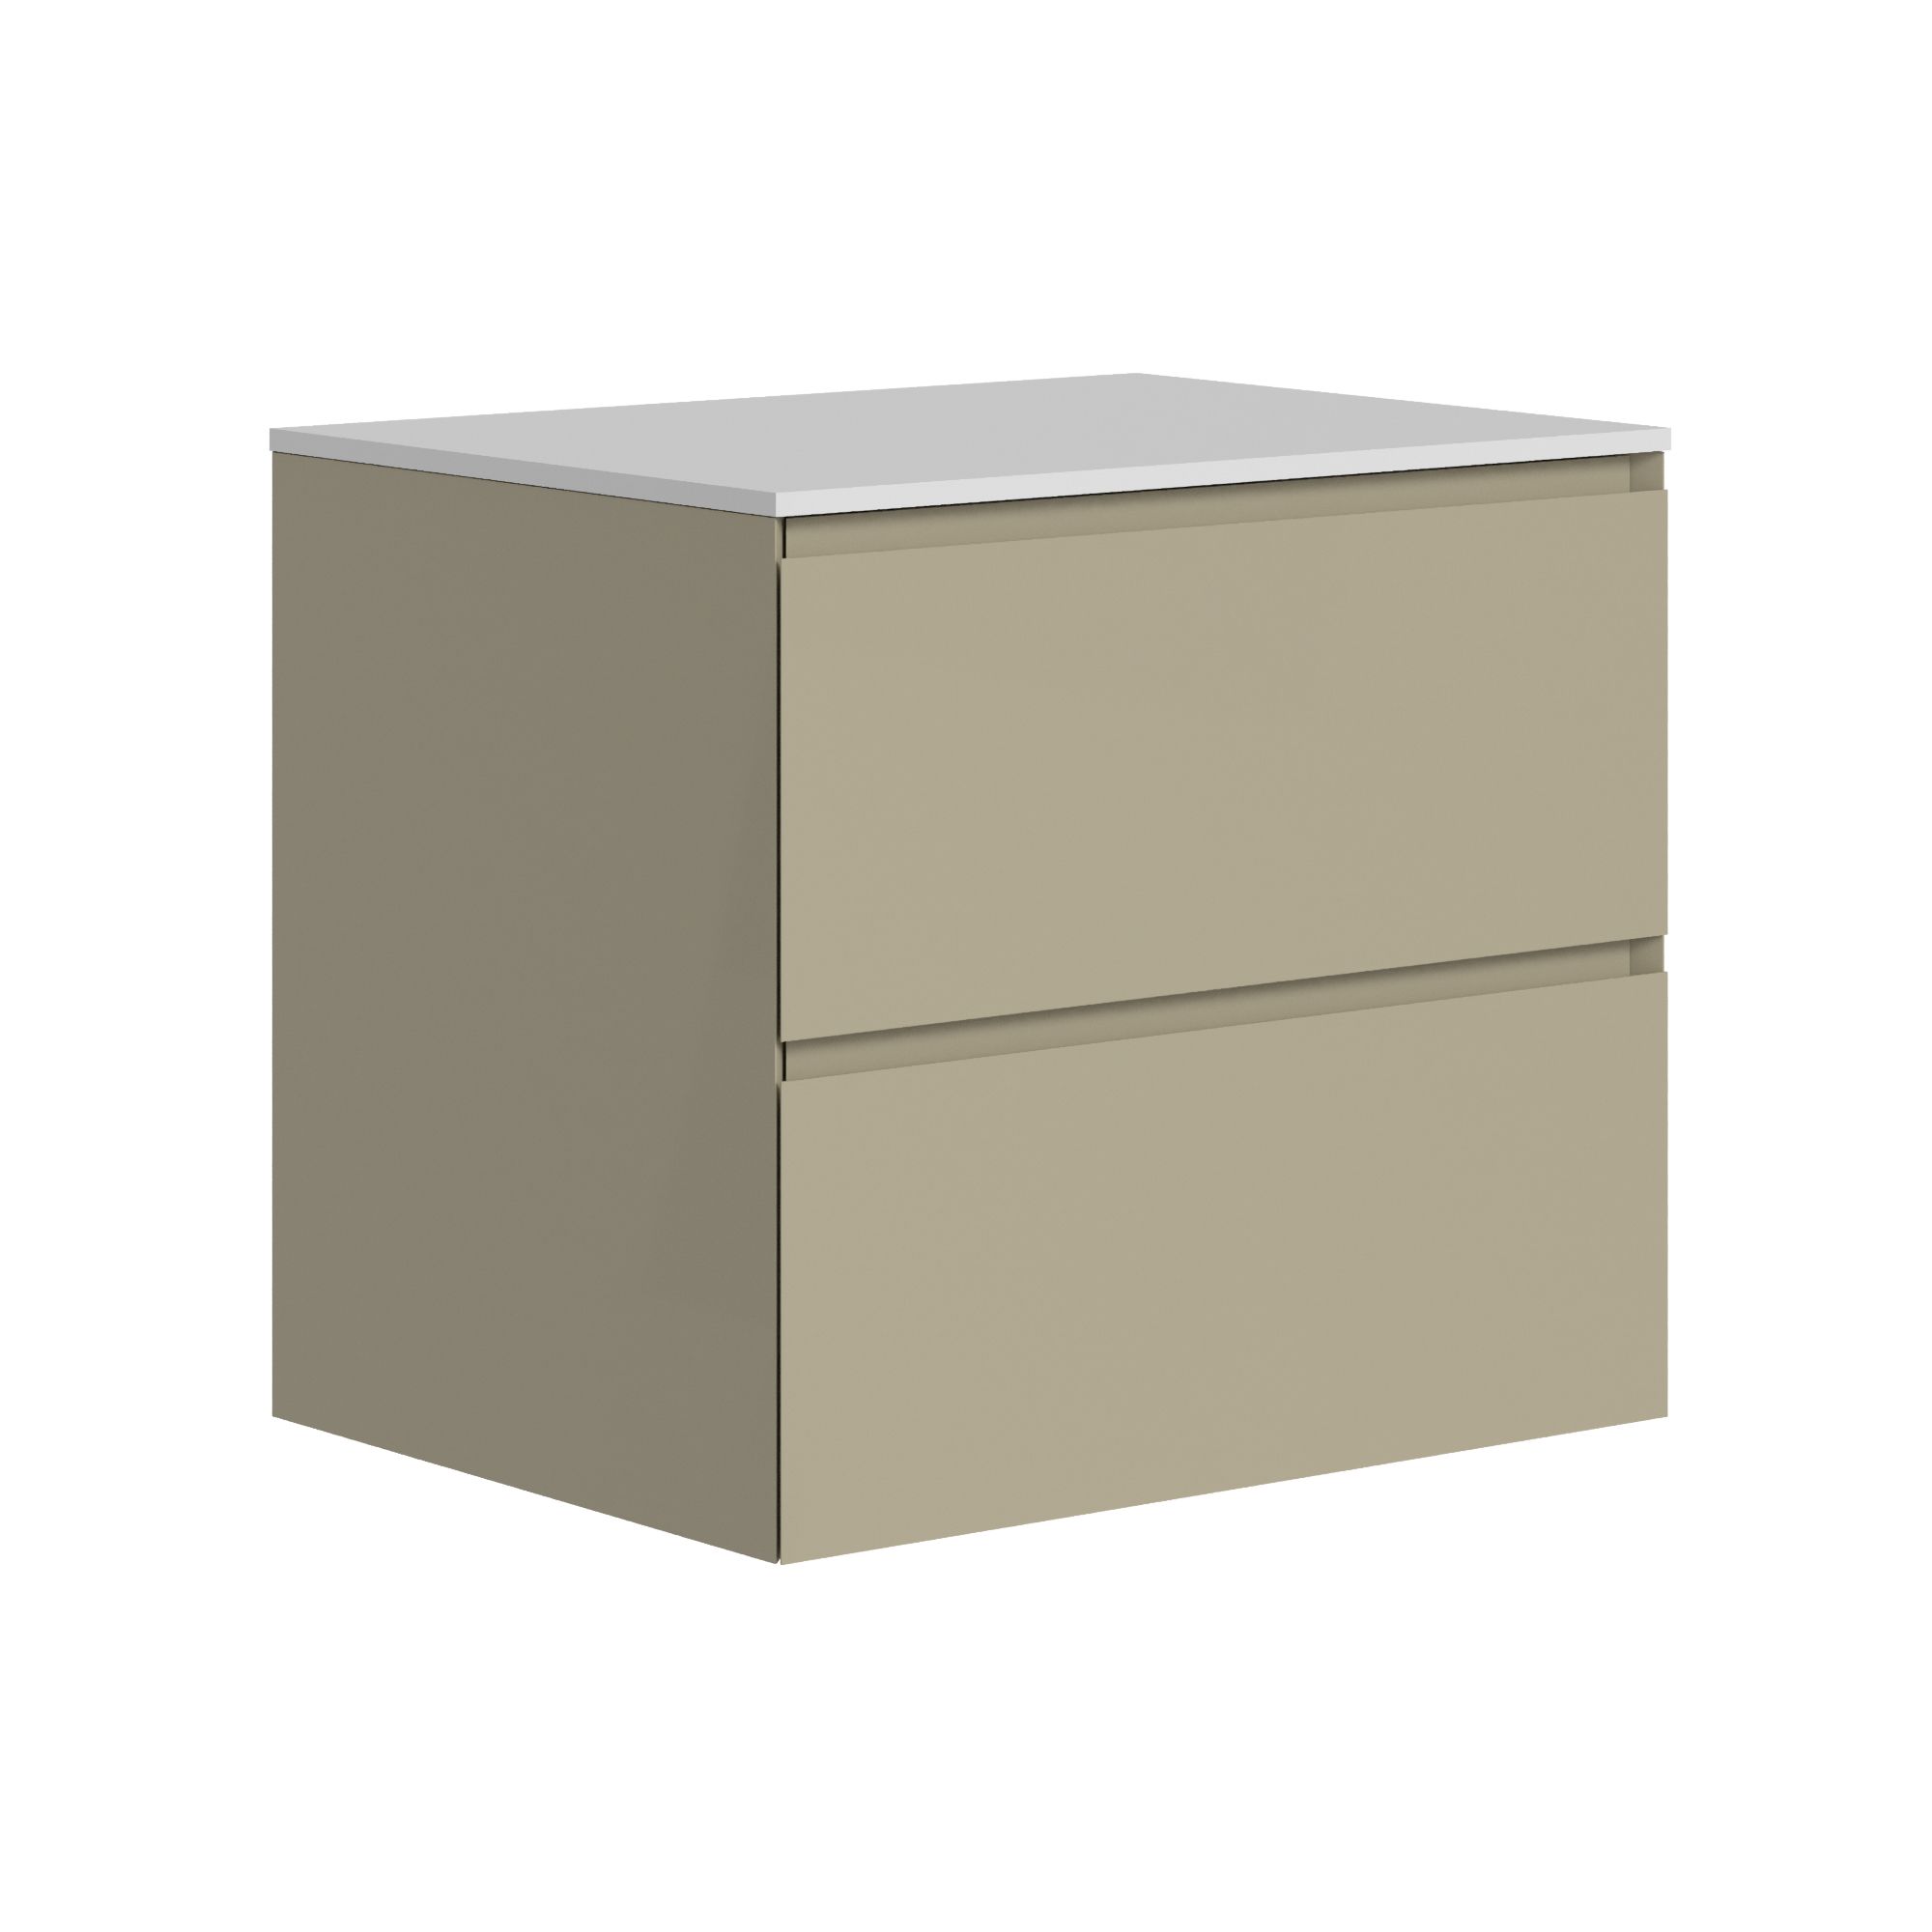 The Ellery Auxiliary Pull Open Unit 600x520mm with Solid Surface Countertop